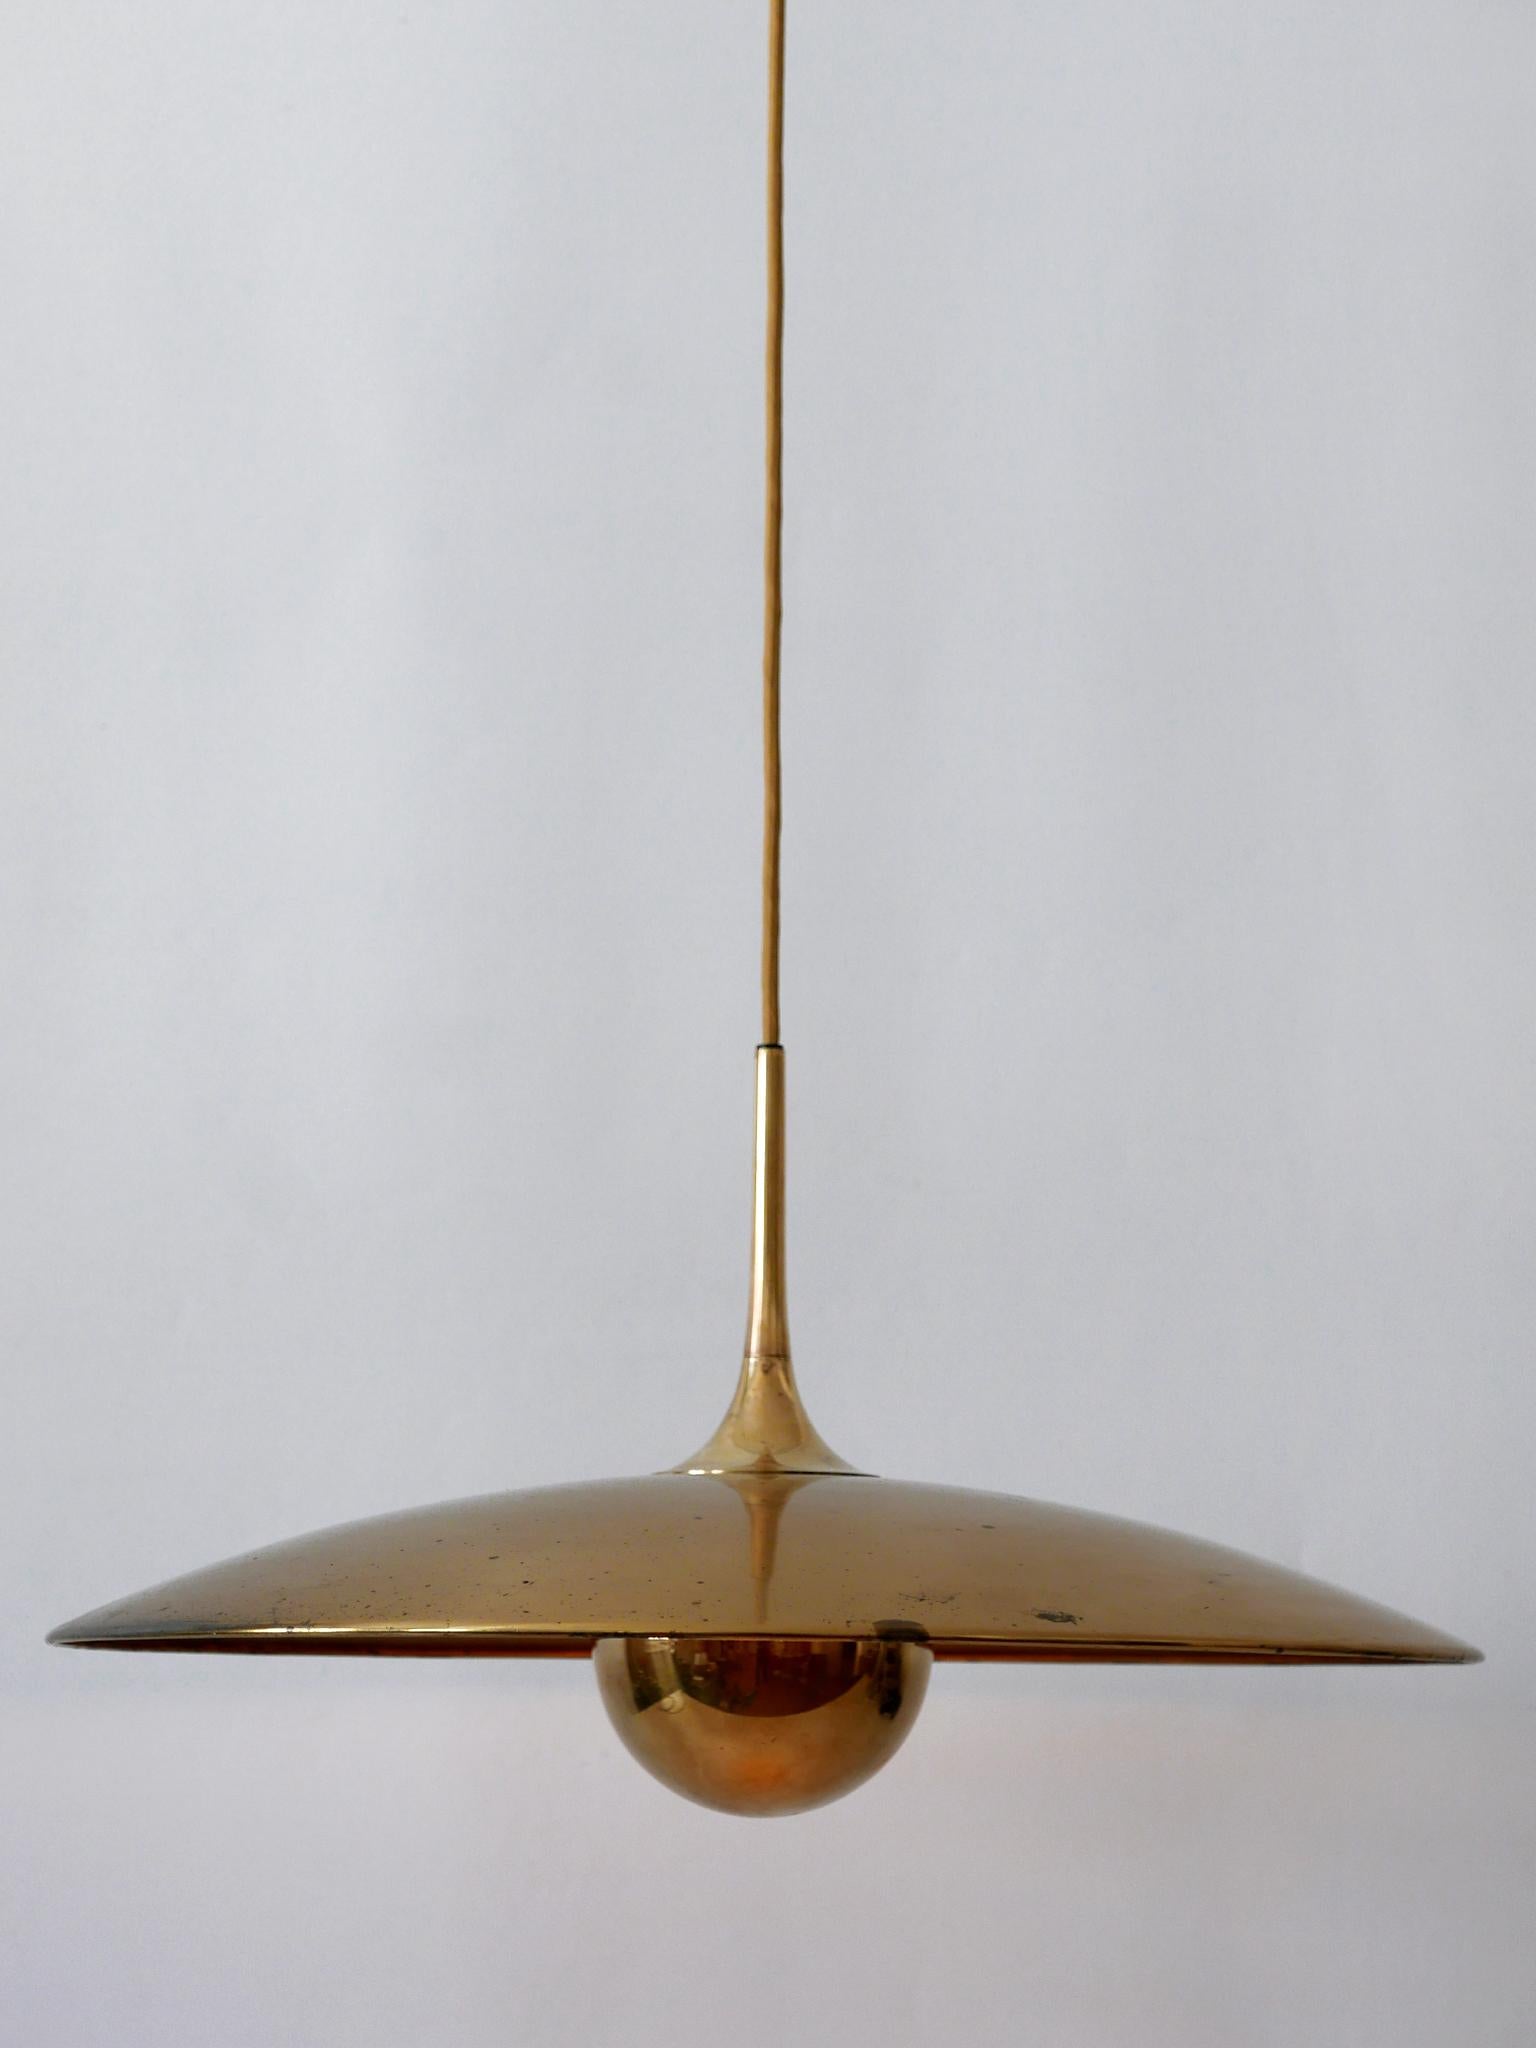 German Rare Early Brass Counterweight Pendant Lamp 'Onos 55' by Florian Schulz 1960s